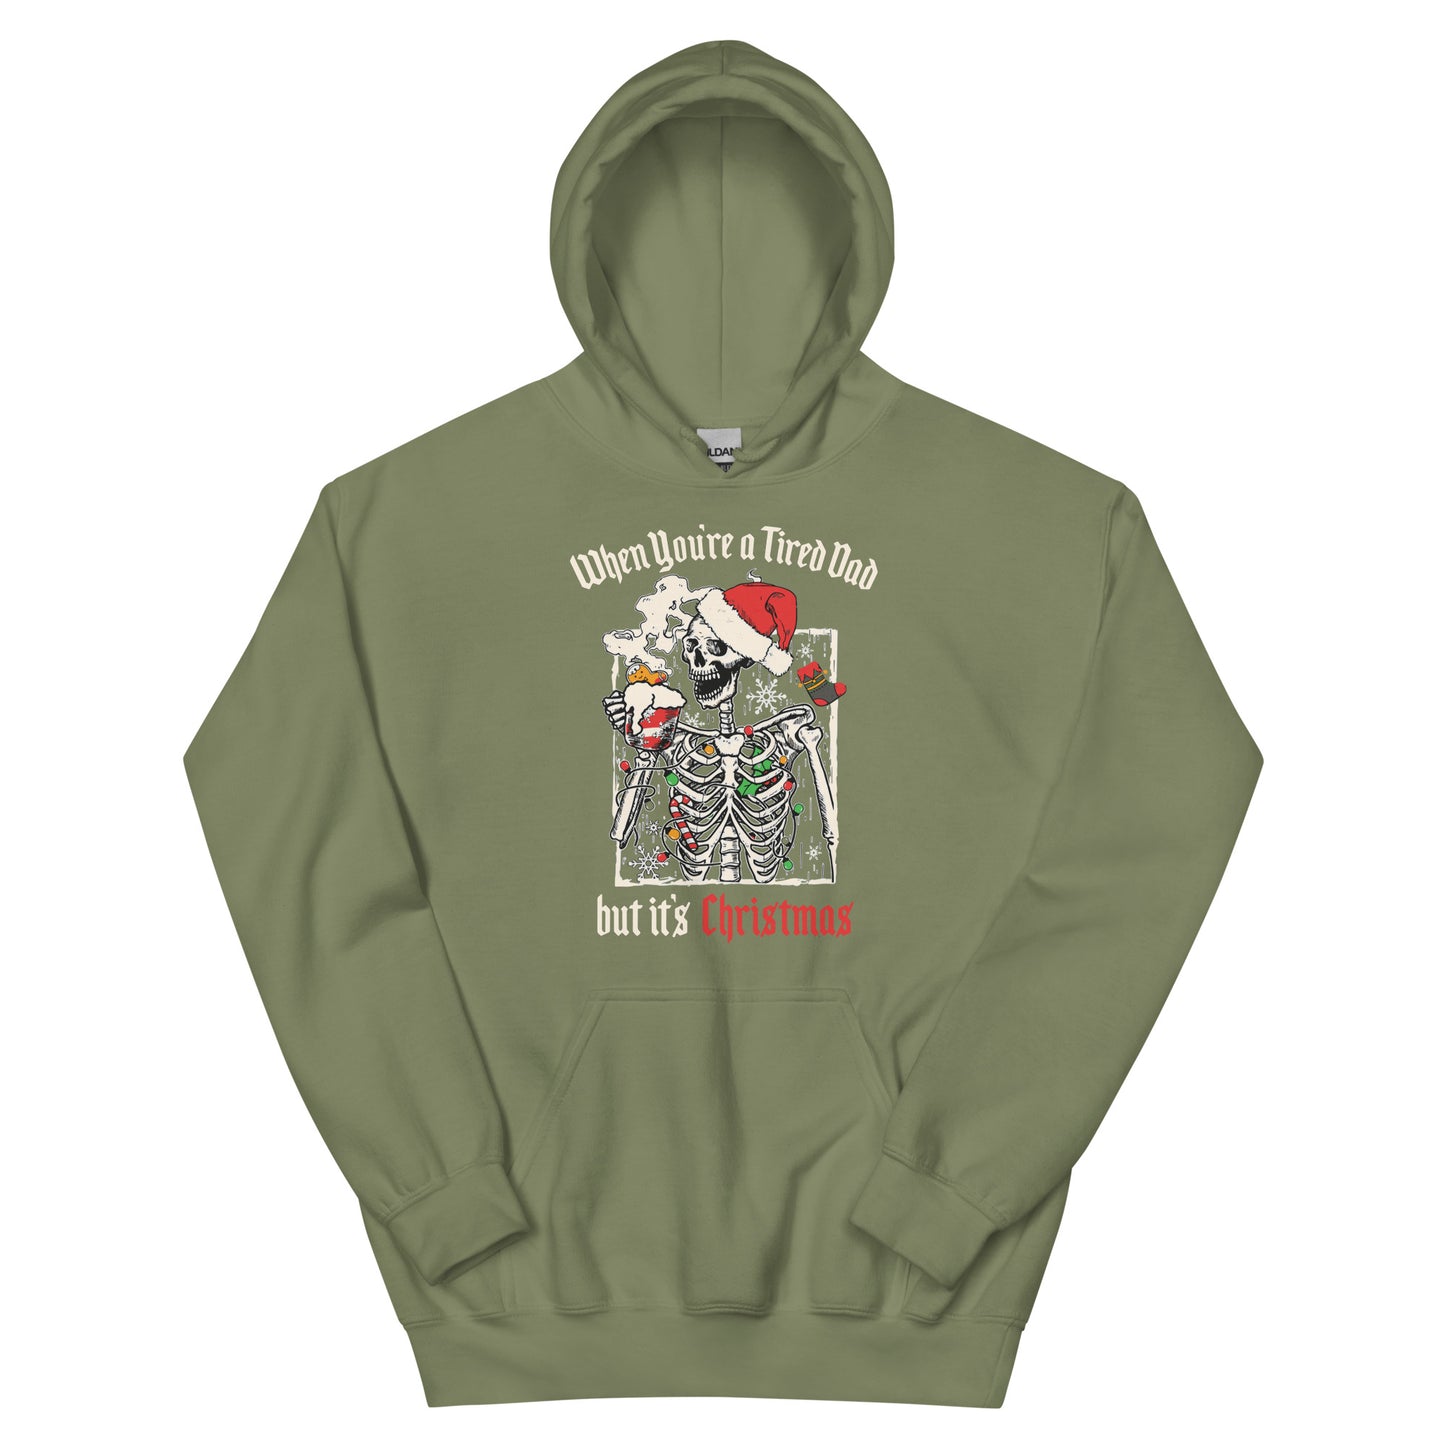 "When You're A Tired Dad" Old English Holiday Hoodie